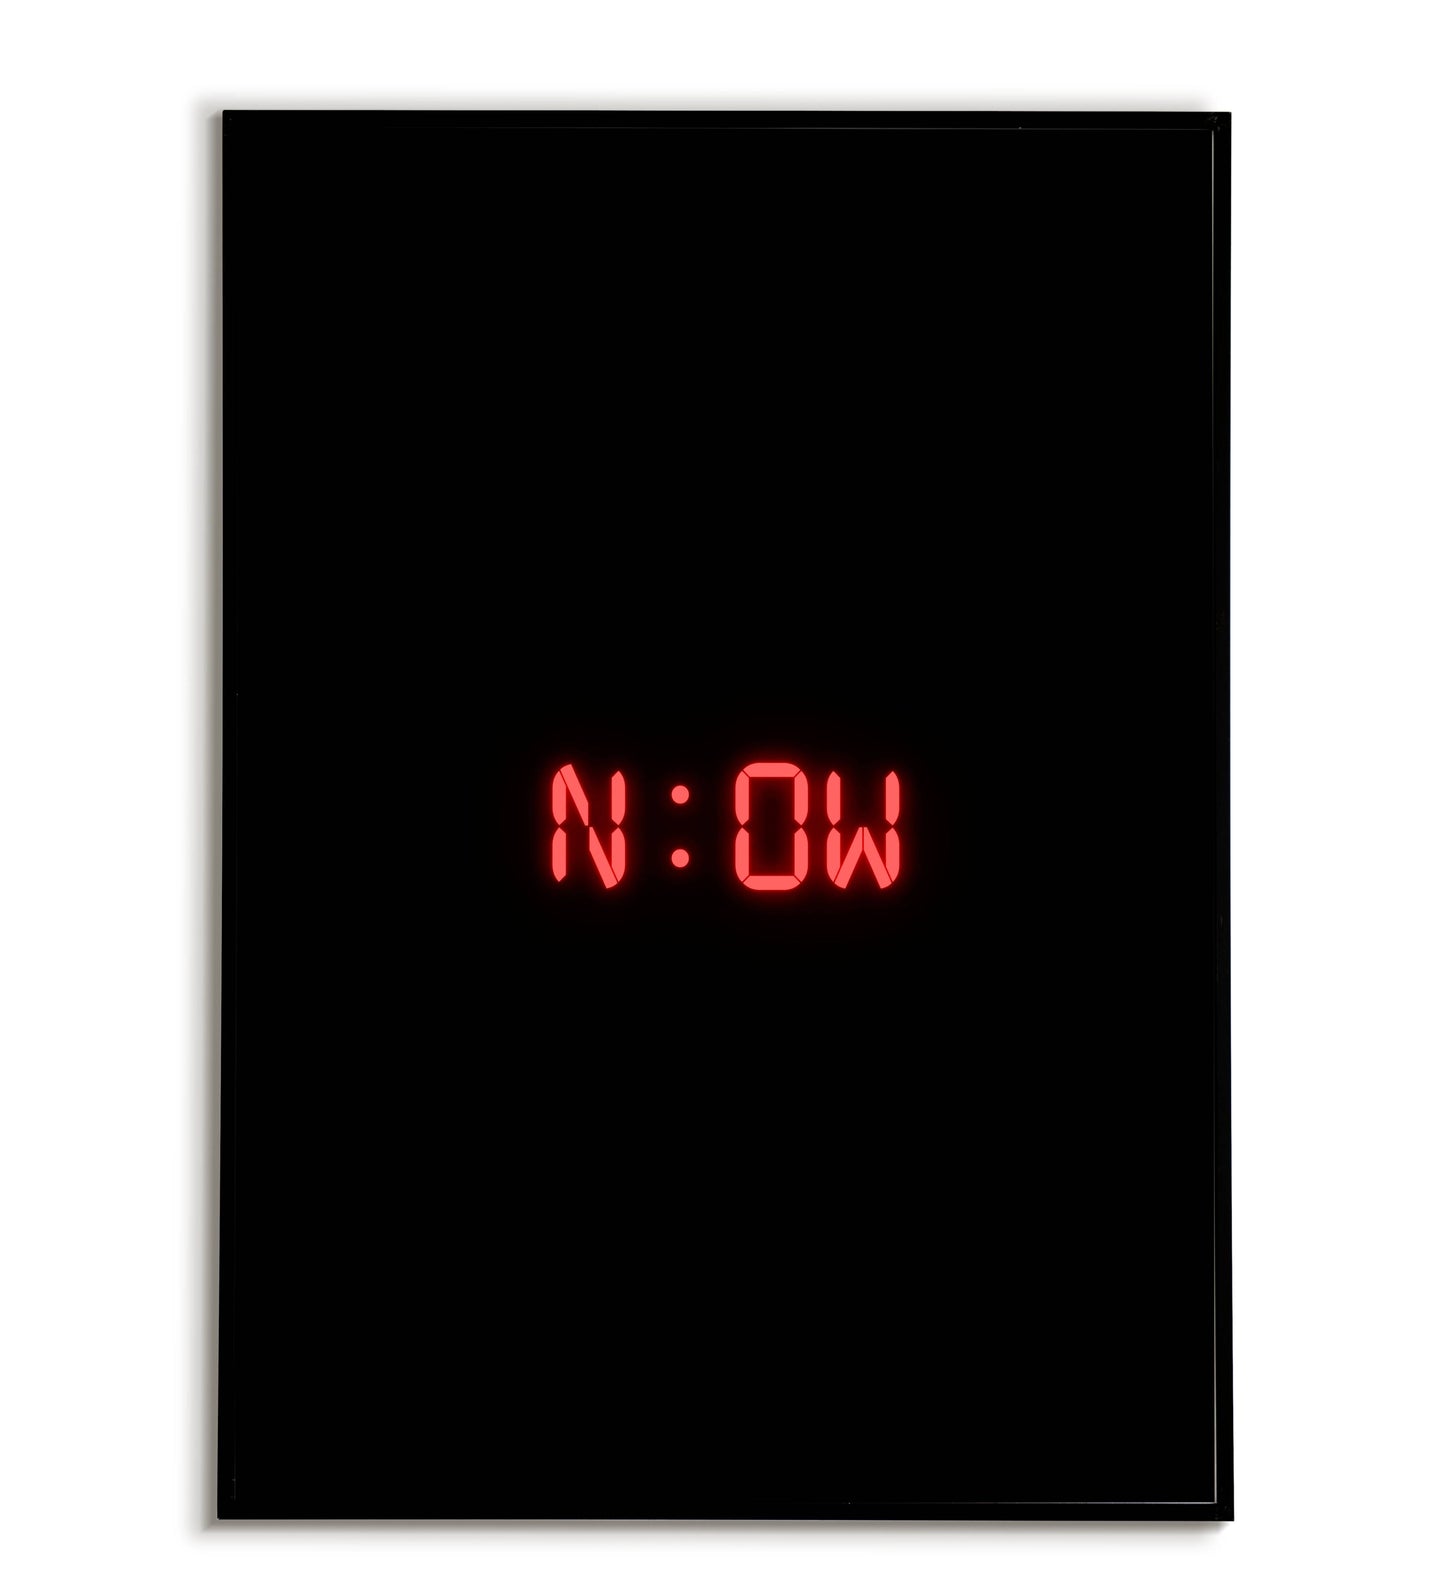 N:OW - Printable Wall Art / Poster. Download this design to enhance your space.	